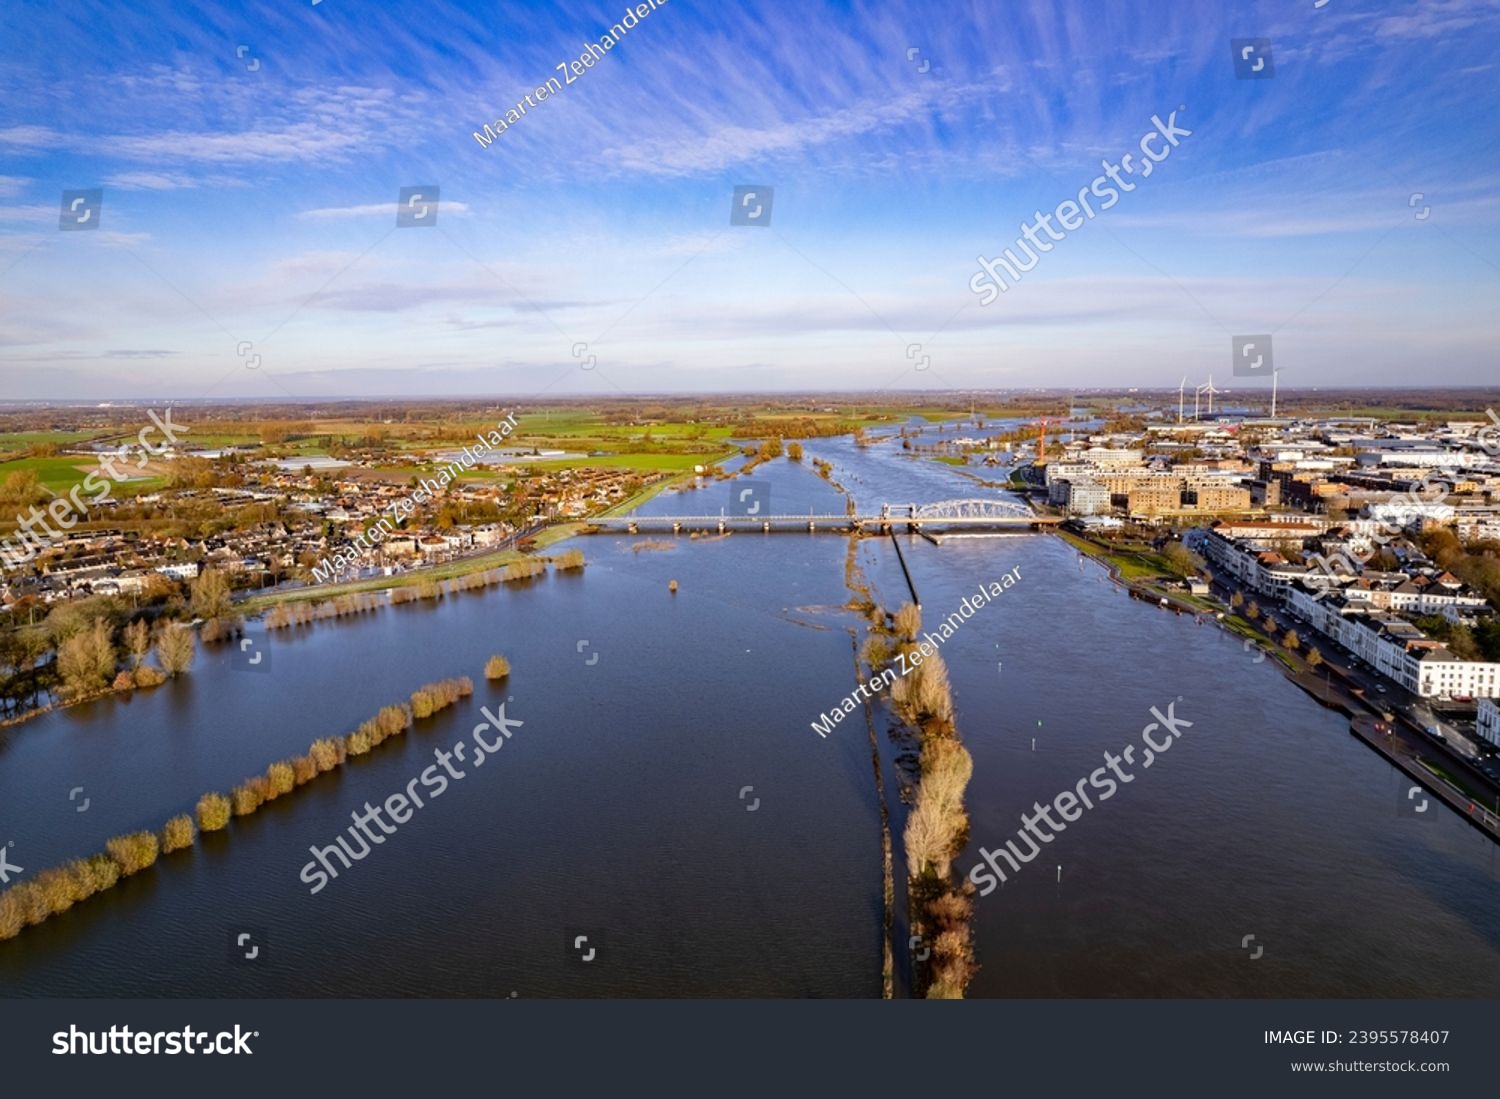 River IJssel being twice its size during high water levels in winter rains seen from above passing countenance boulevard of Zutphen, The Netherlands. Aerial of flooded floodplains at city limits. #2395578407